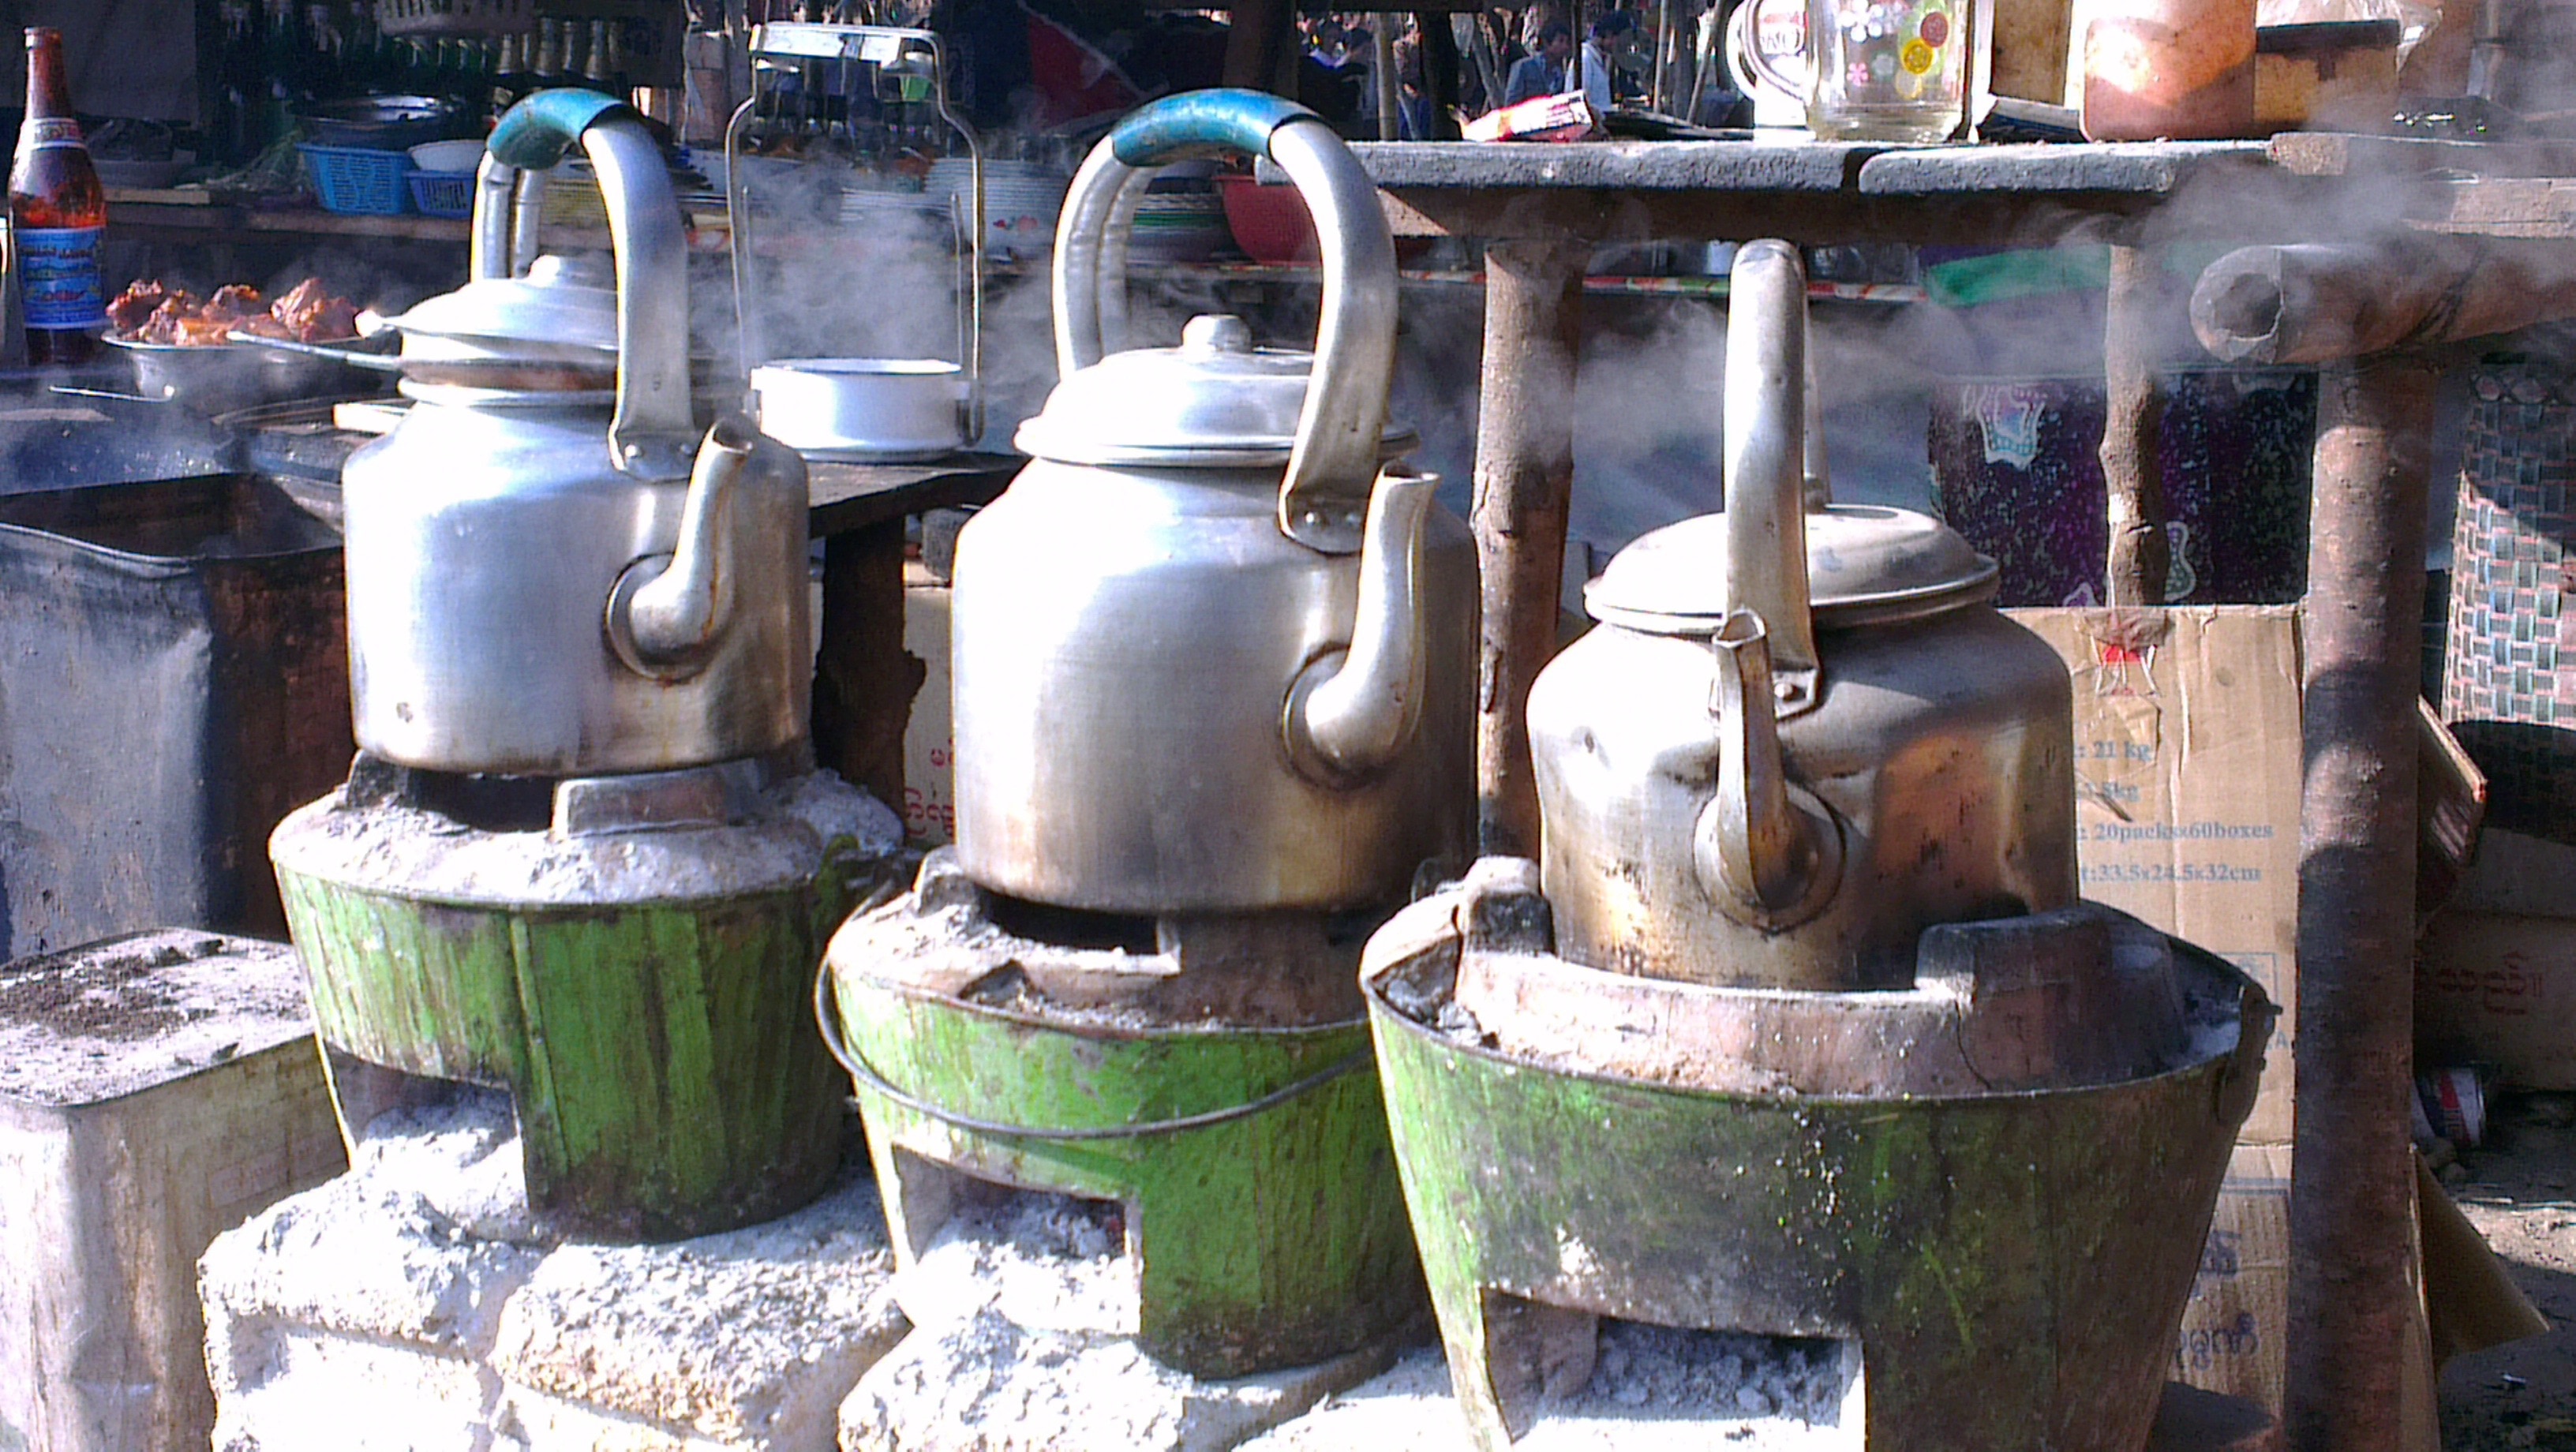 Aged, Metal, Myanmar, Kettles, Stoves, outdoors, day